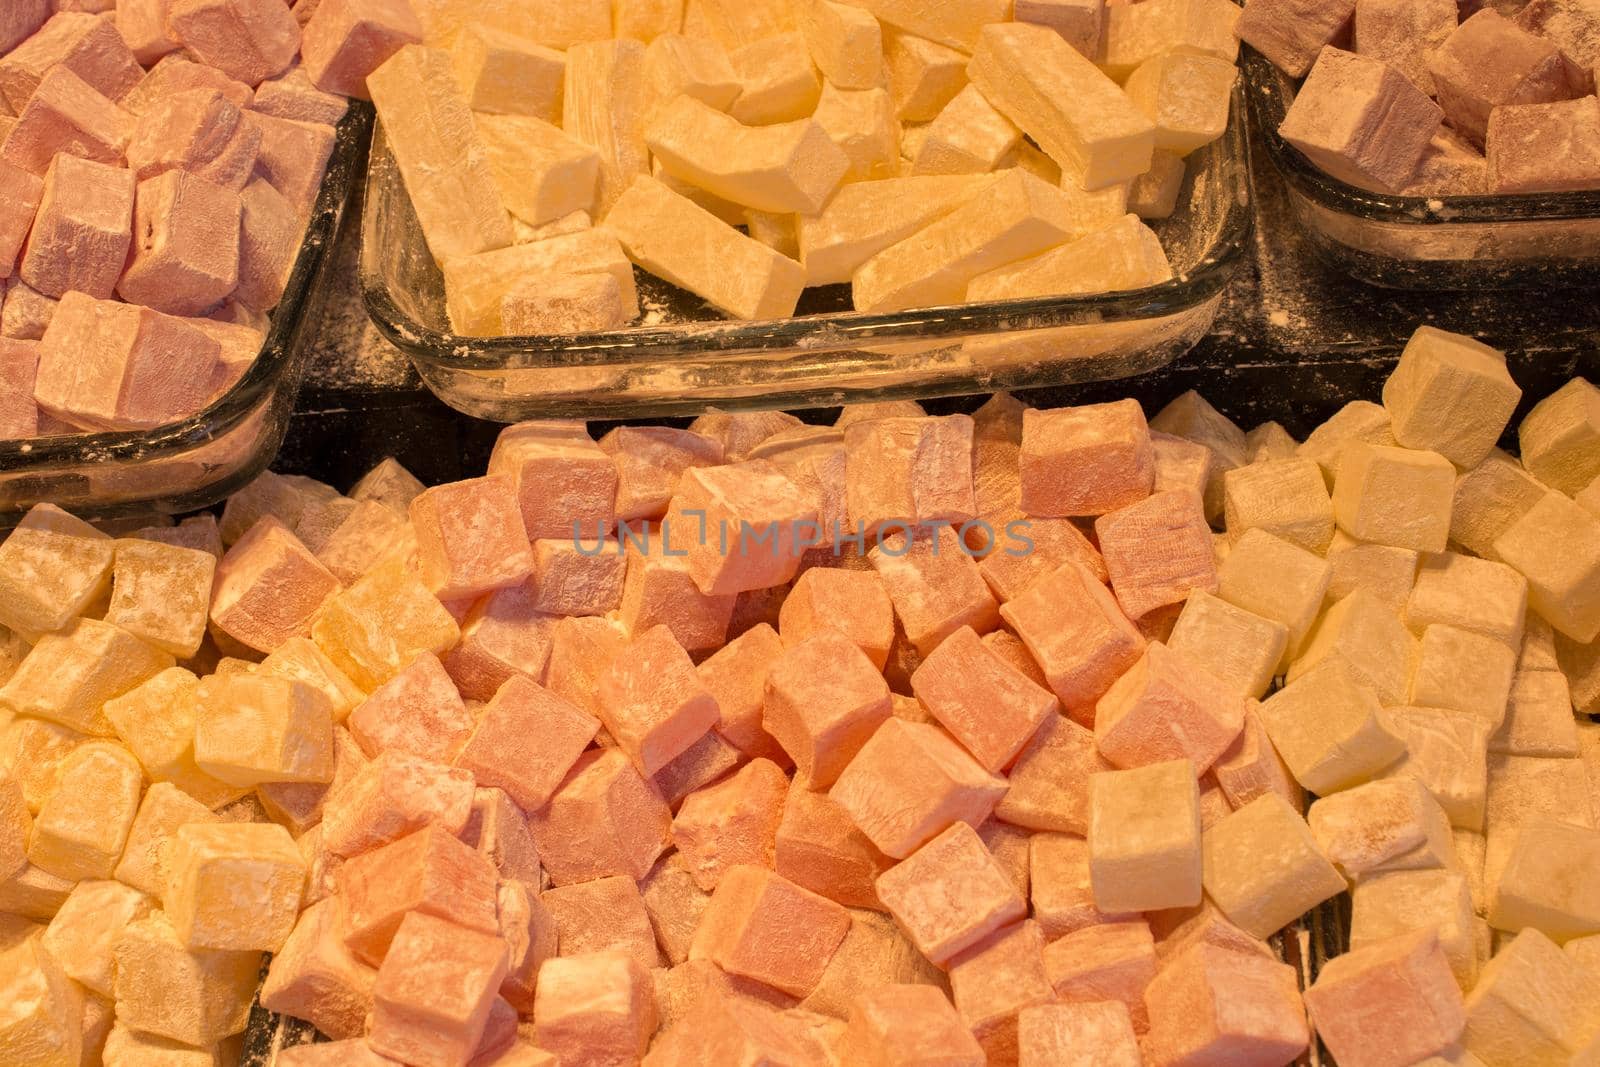 Turkish delight sweets made in Traditional style